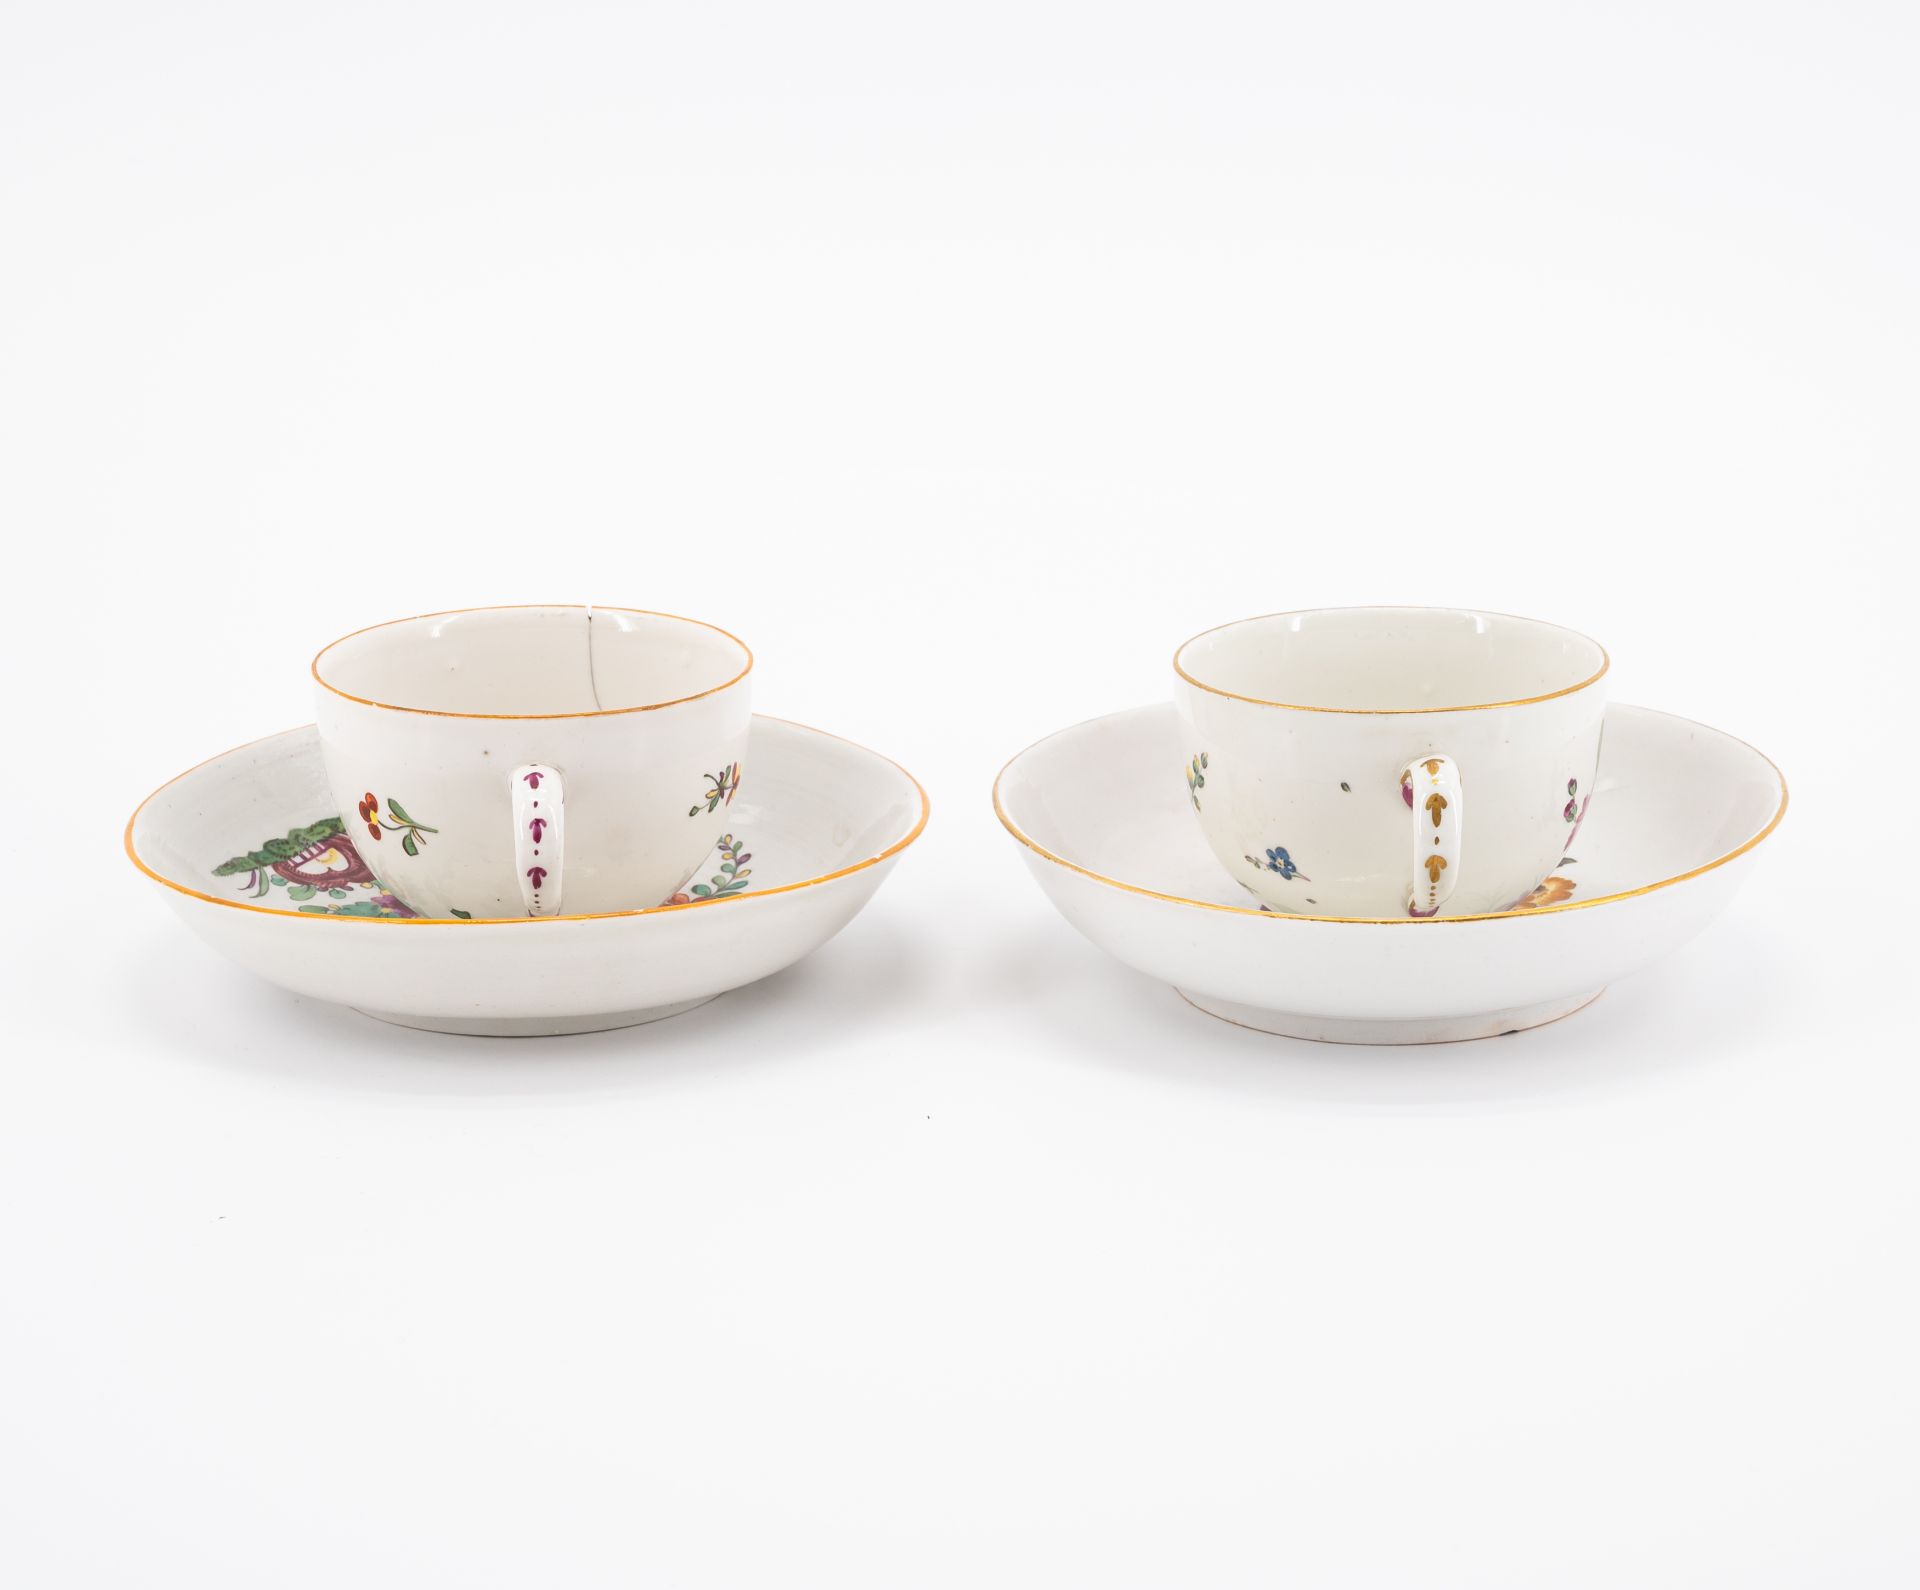 SIX PORCELAIN CUPS AND THREE SAUCERS WITH BIRD DECOR, FLOWERS AND LANDSCAPE SCENES - Image 8 of 16